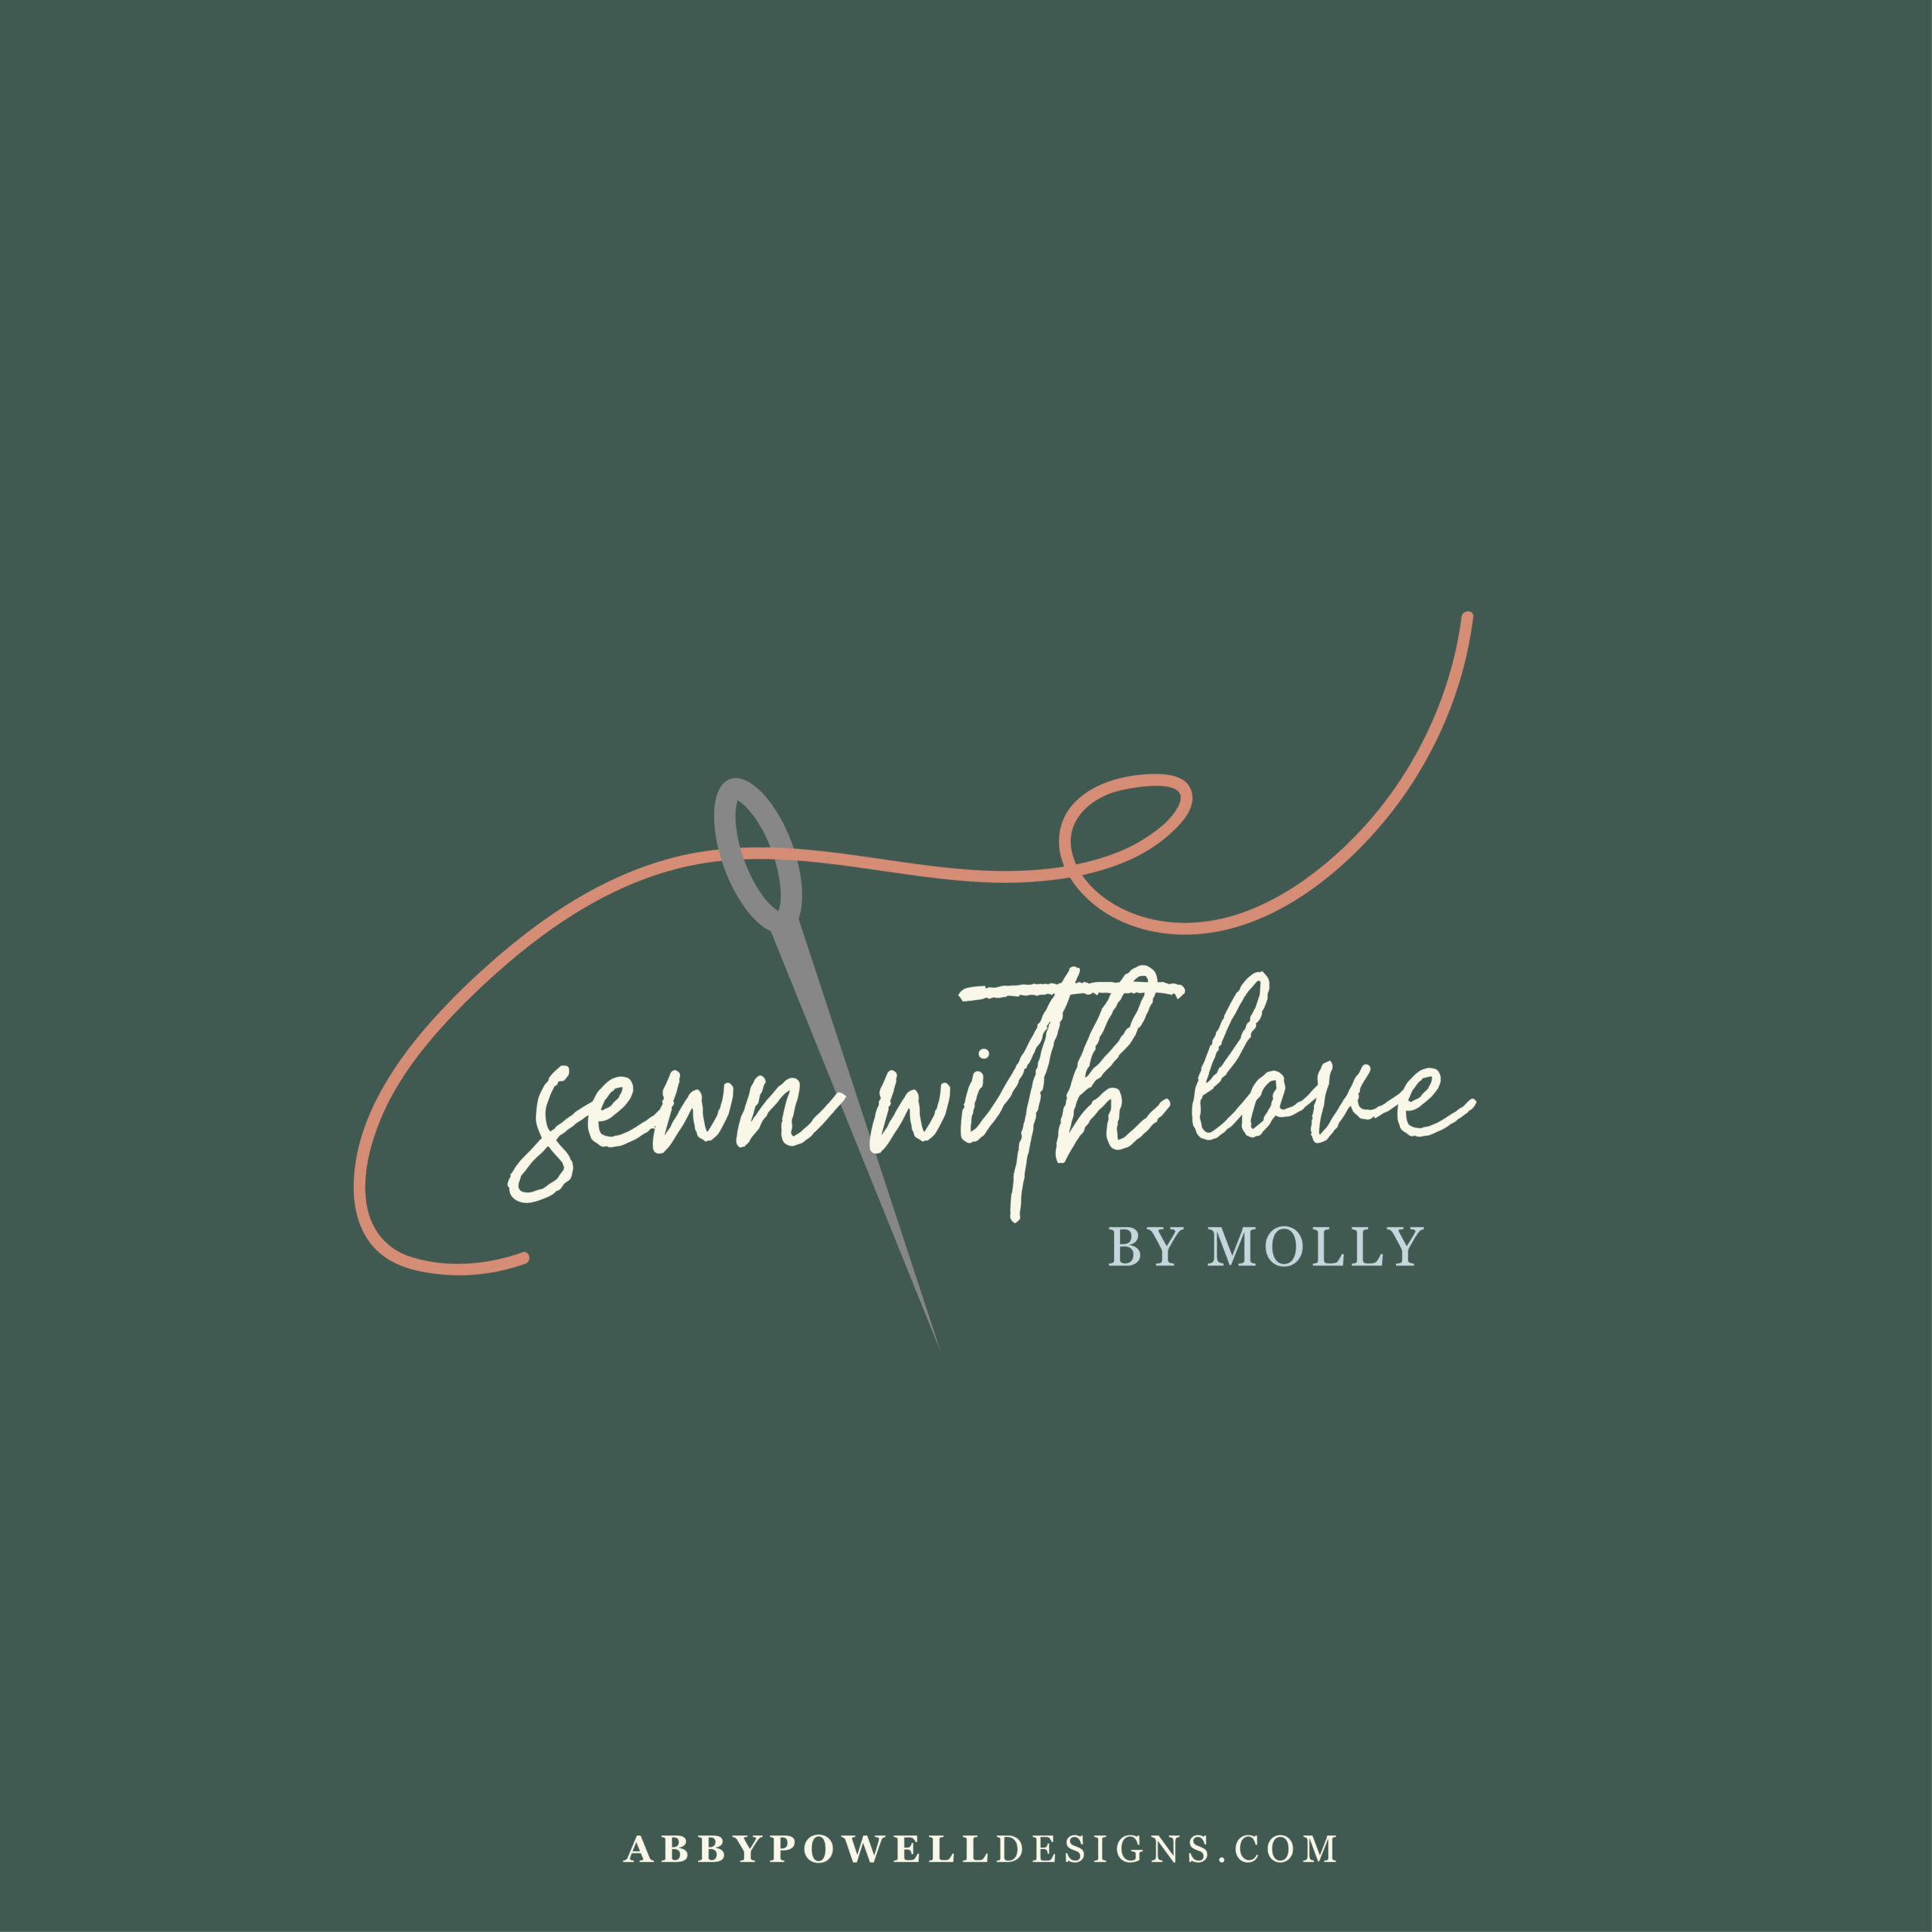 Custom brand design by Abby Powell Designs for Sewn With Love By Molly